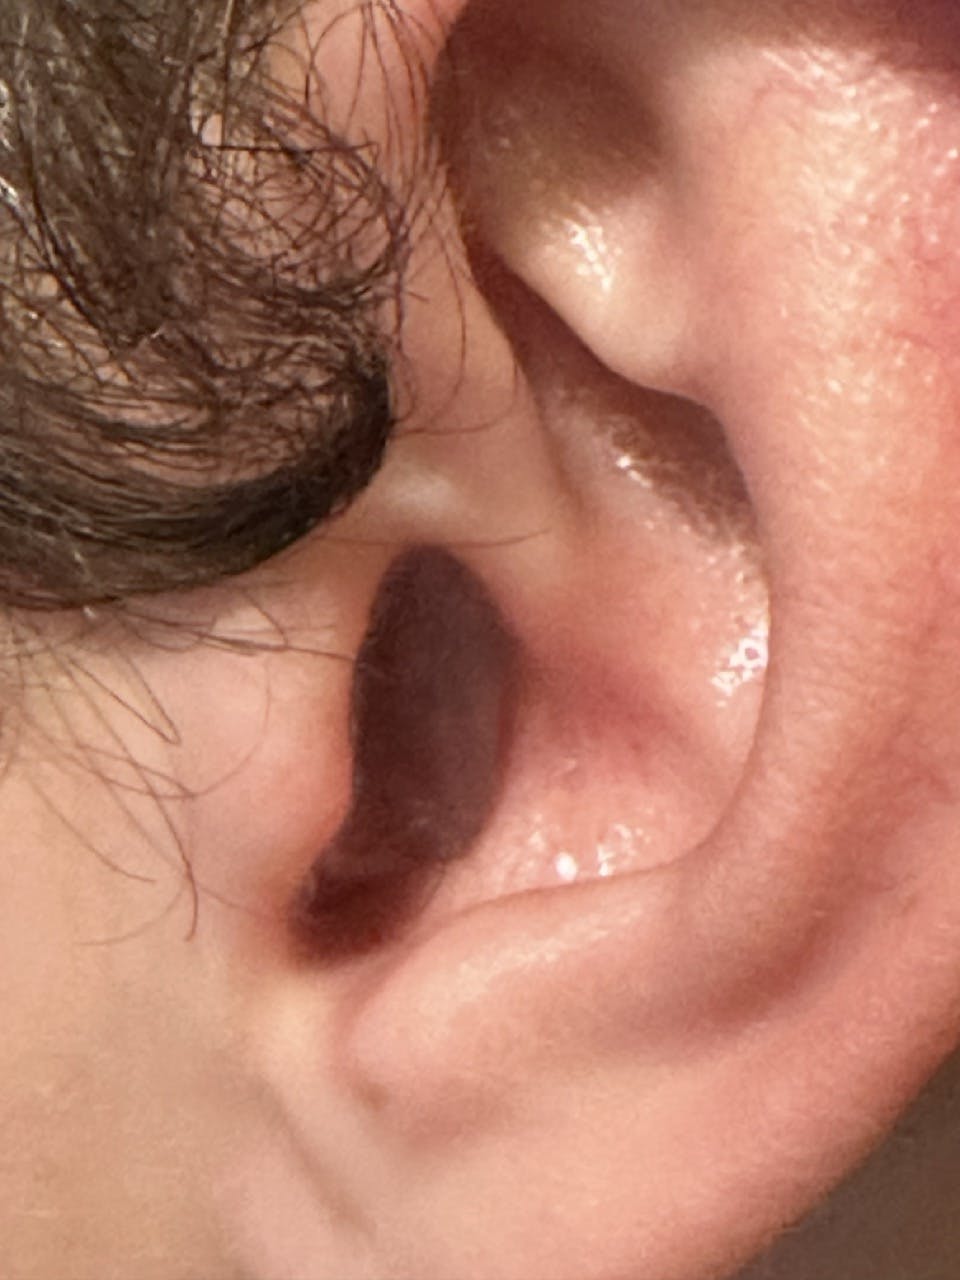 A finished ear plug in an ear